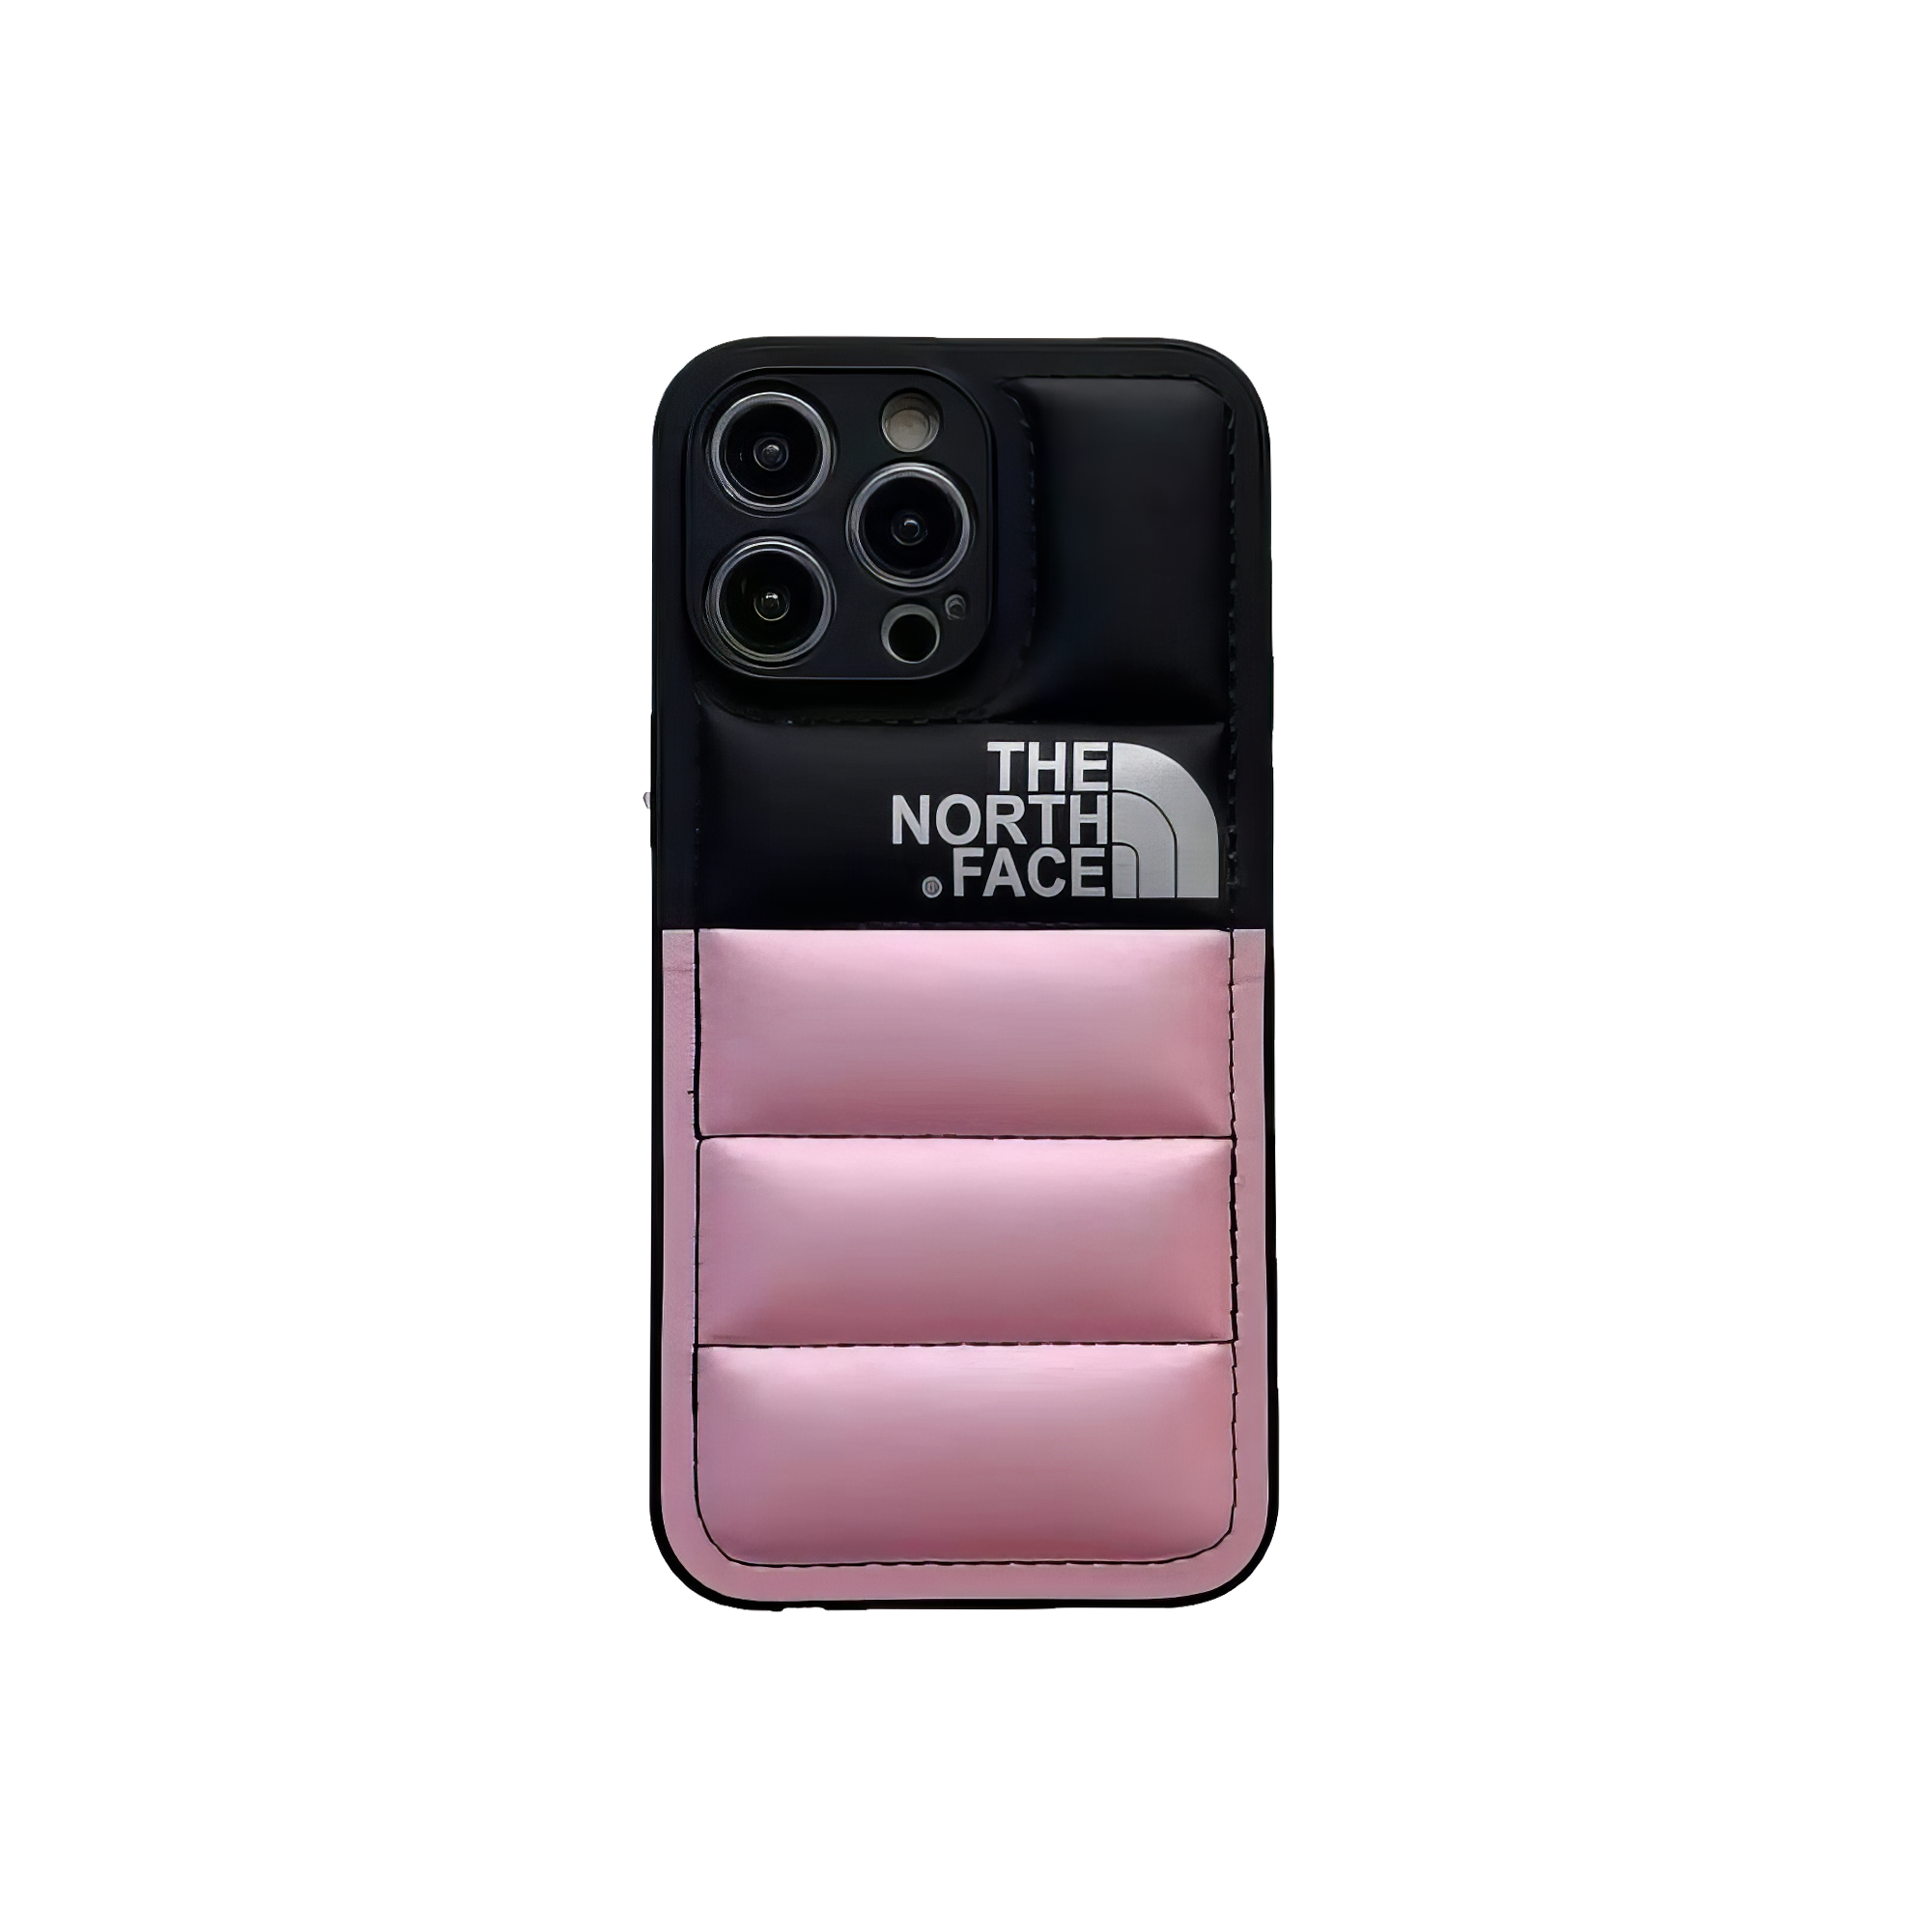 The North Face half pink and black smartphone case, adding a subtle flair to tech gear.